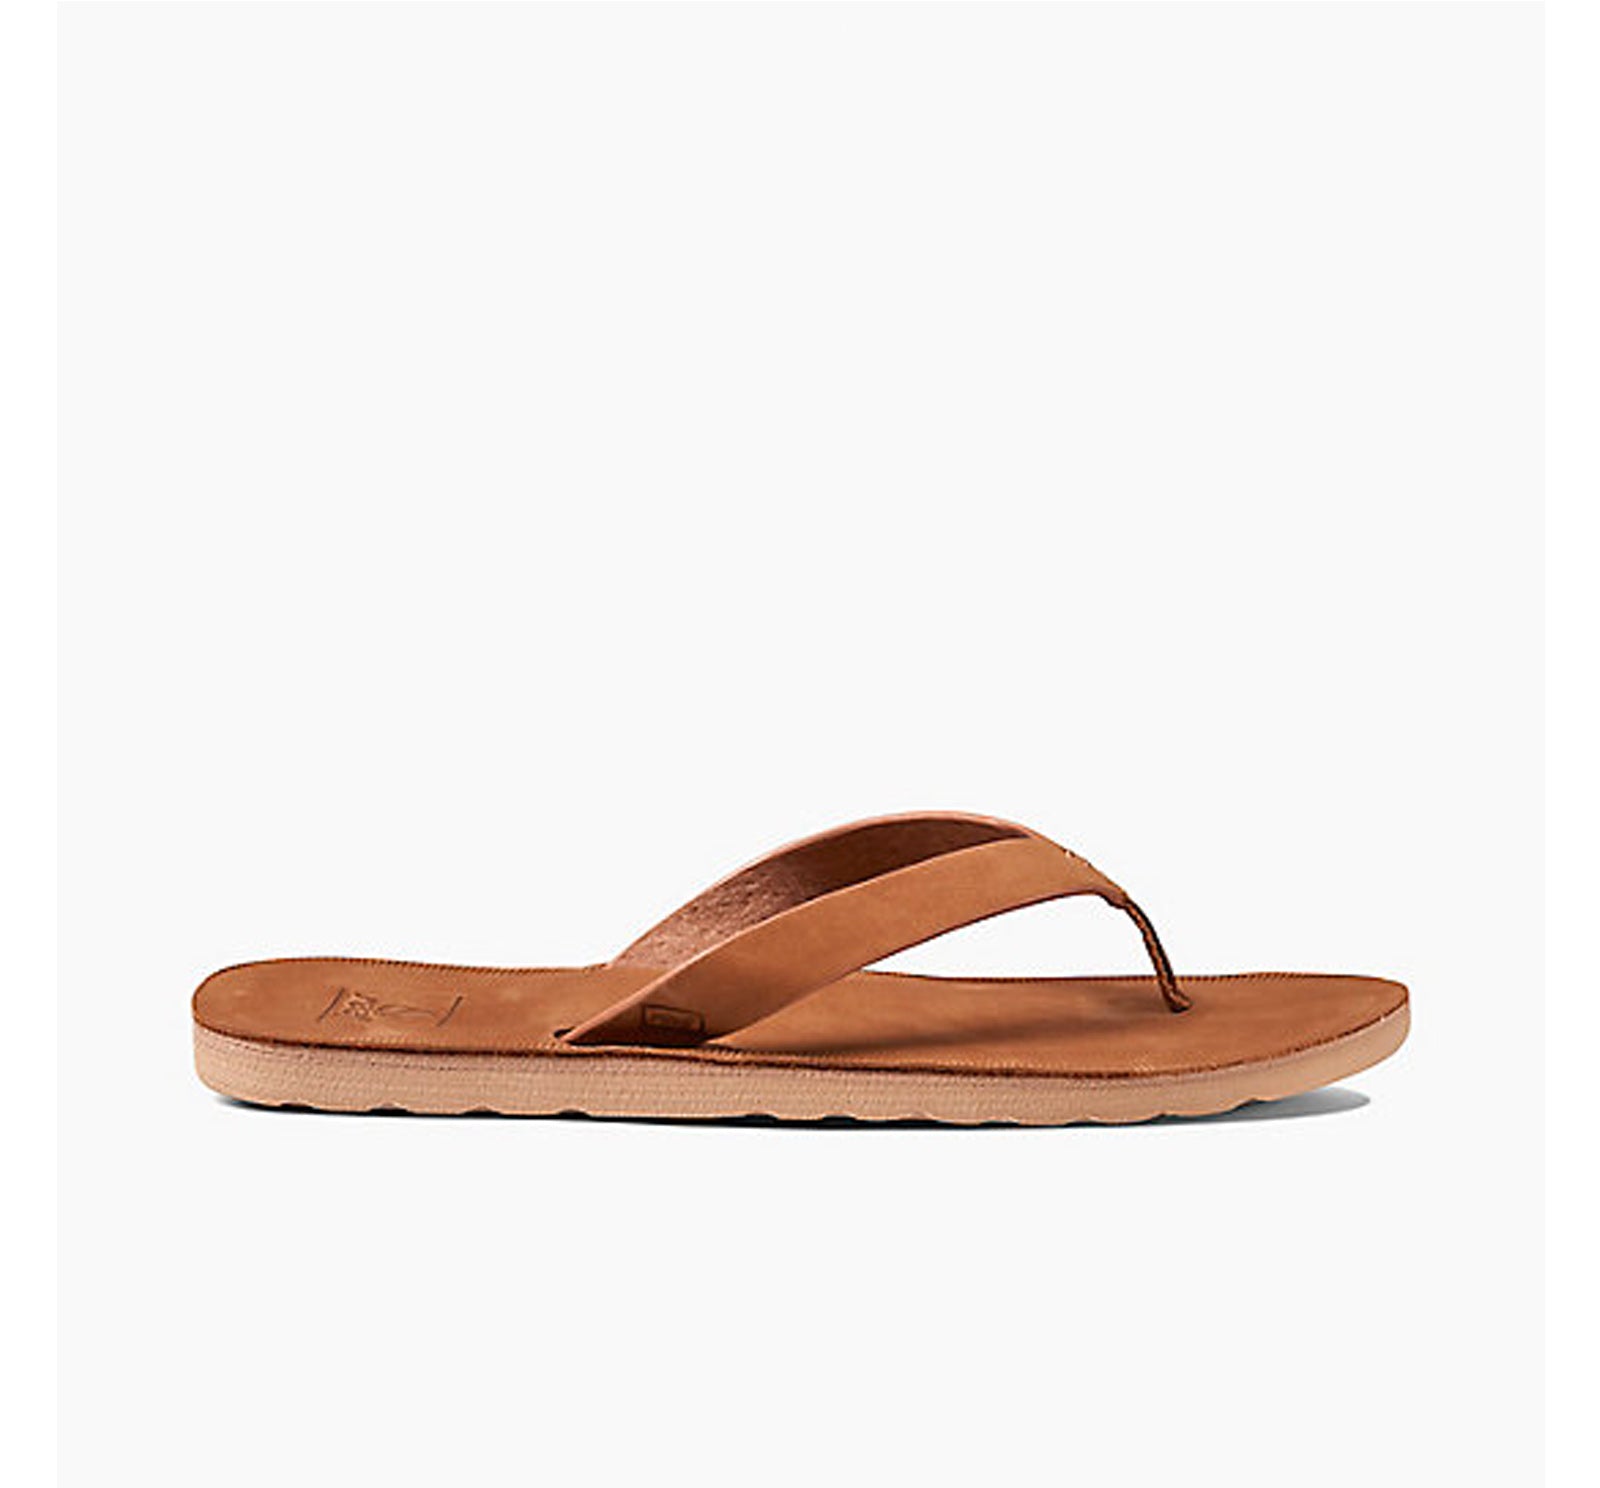 Reef Voyage Leather Women's Sandals